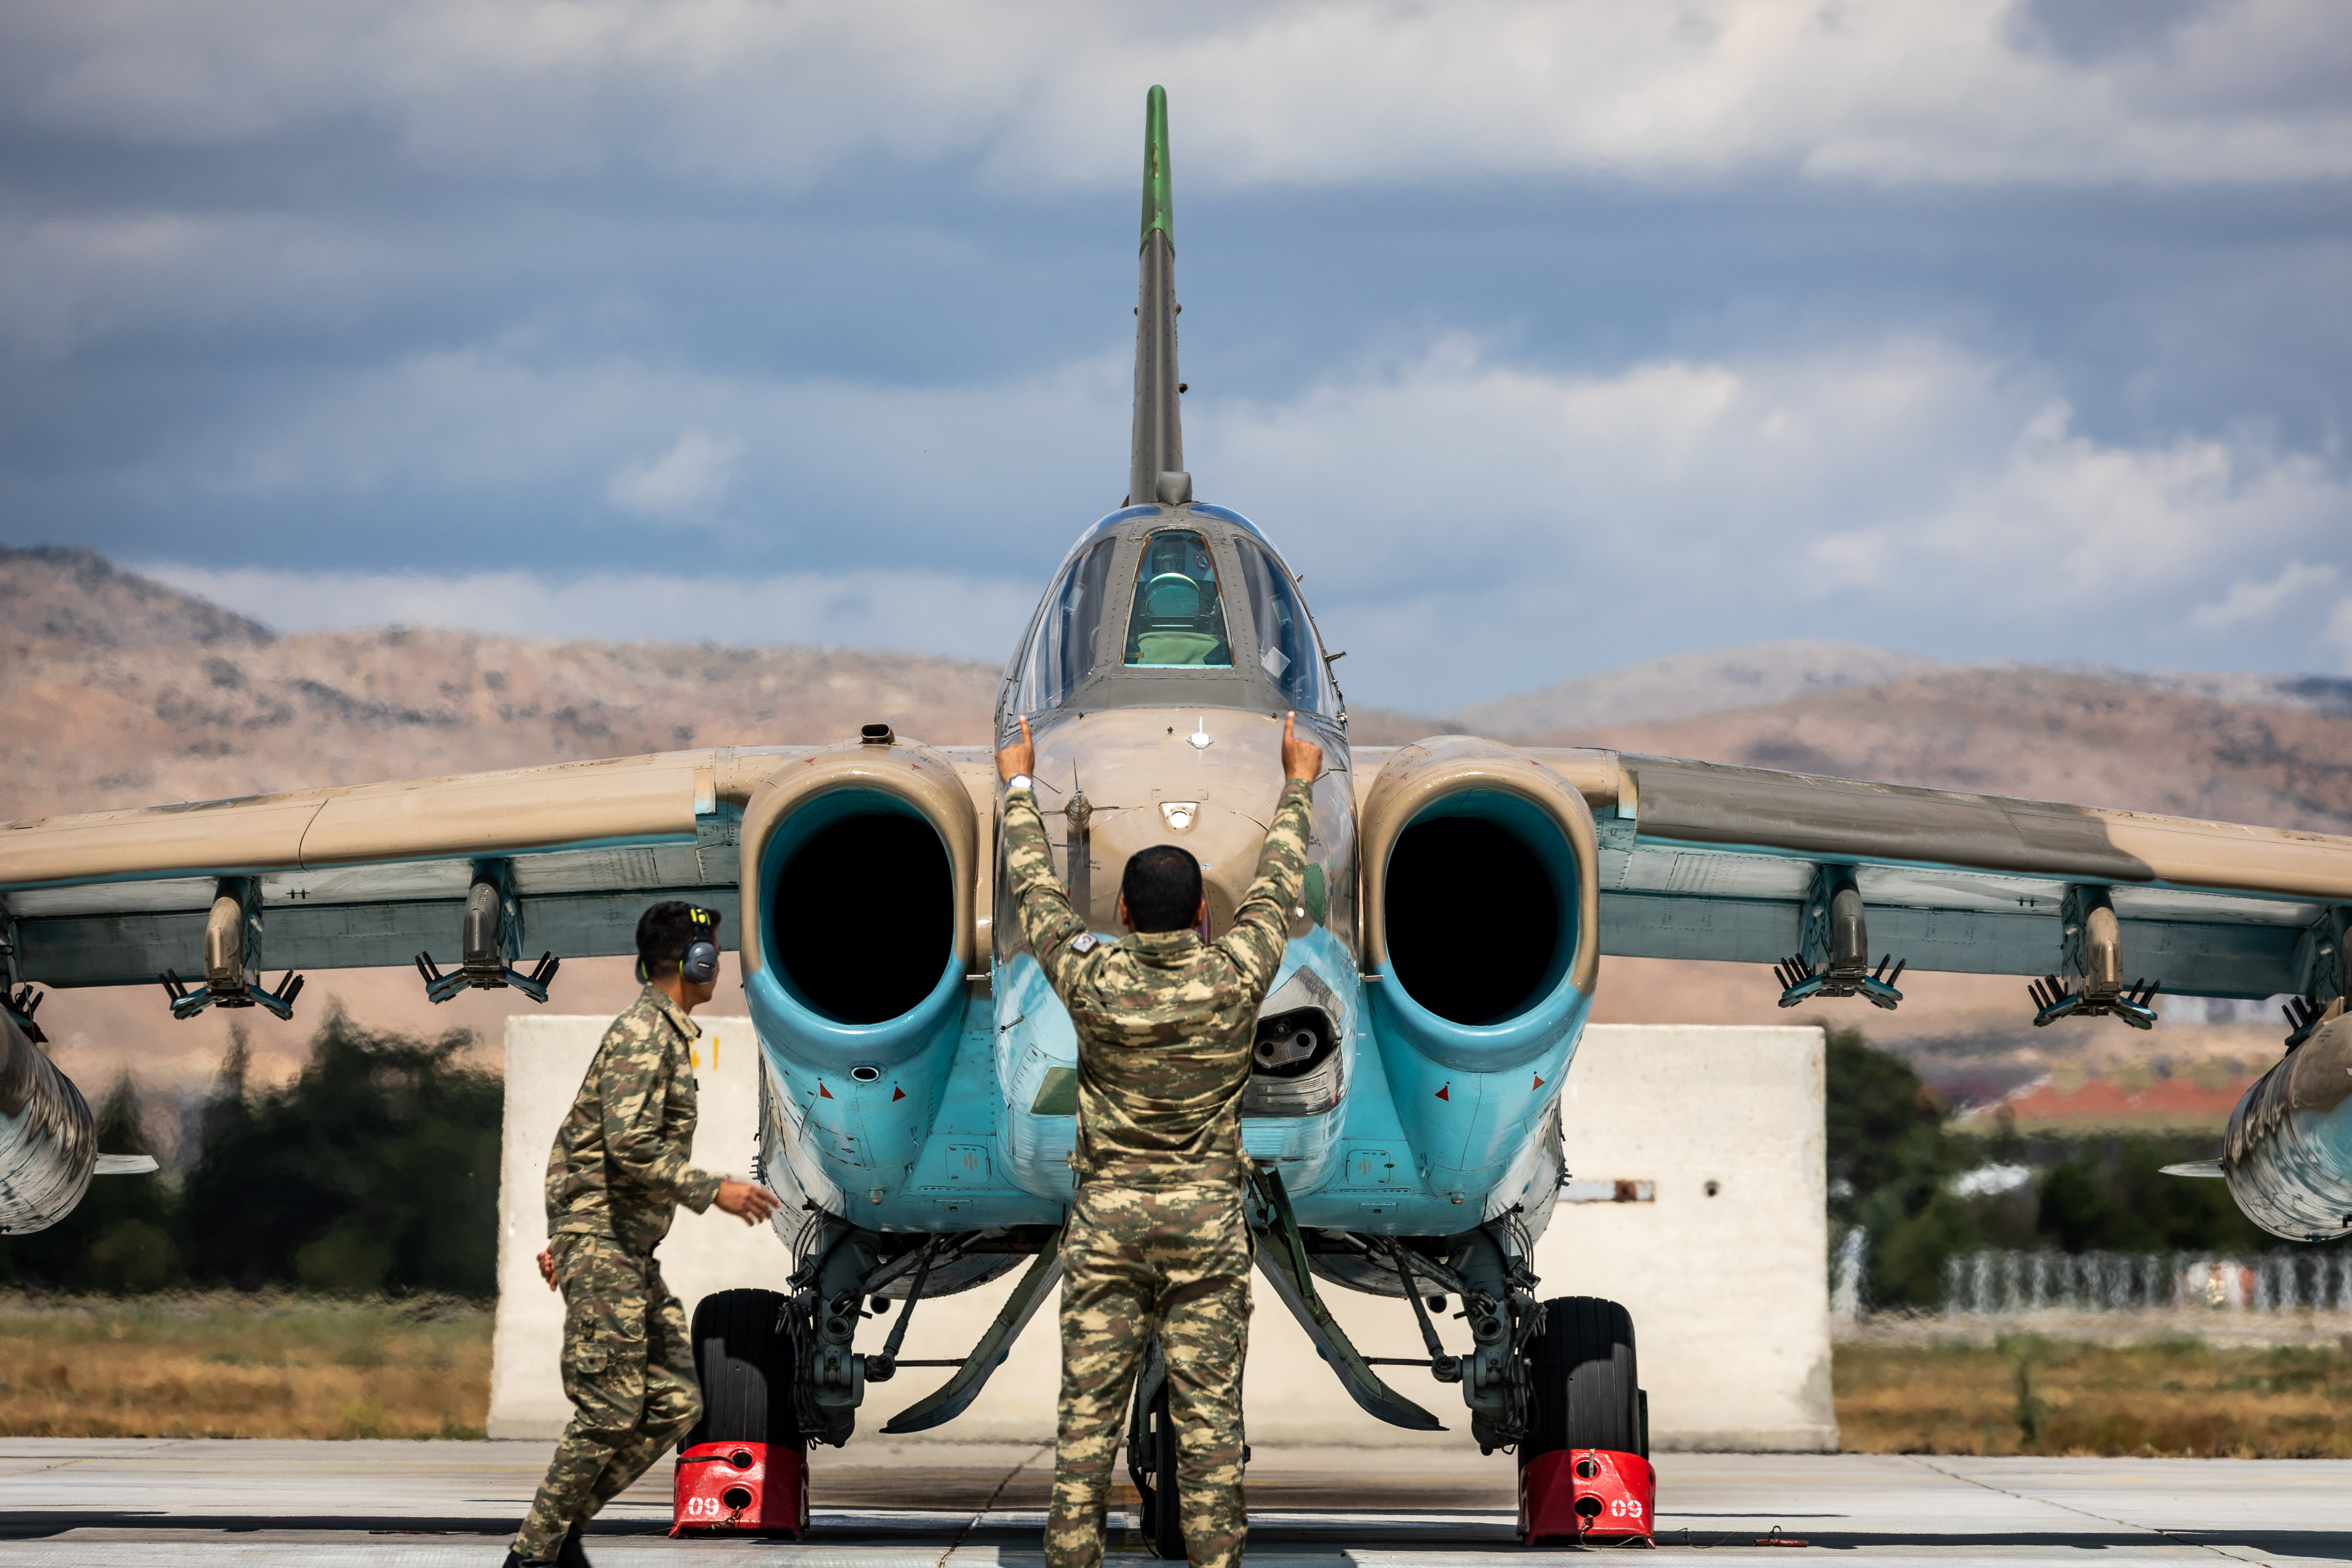 Image shows aviators directing Typhoon aircraft on the airfield.